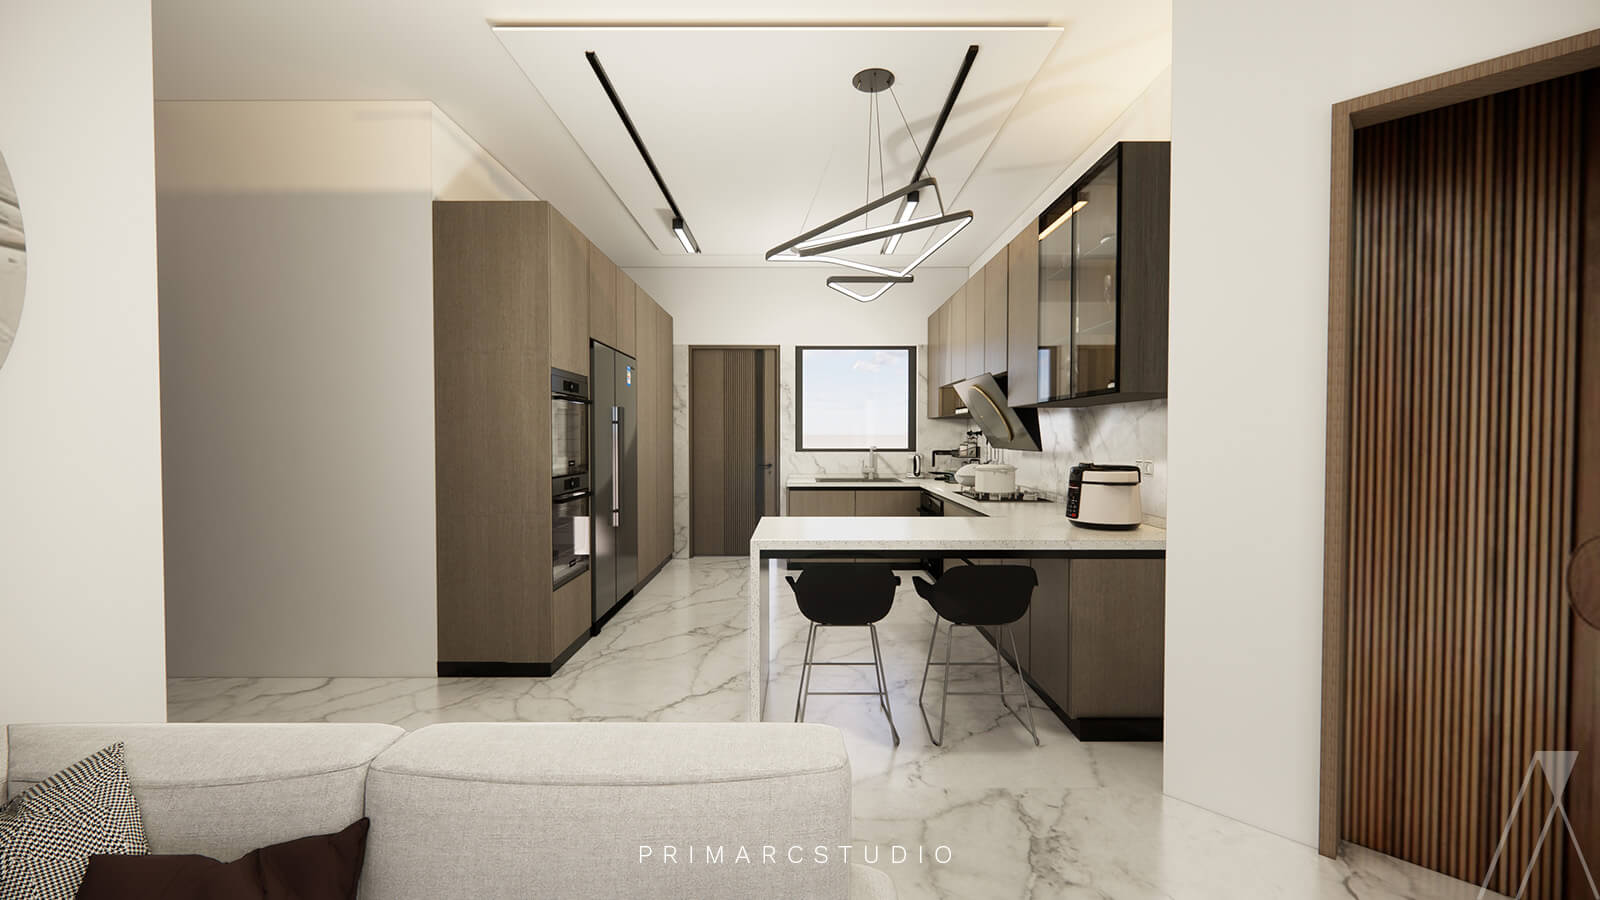 Kitchen interior design with breakfast counter in front of the kitchen facing corridor.